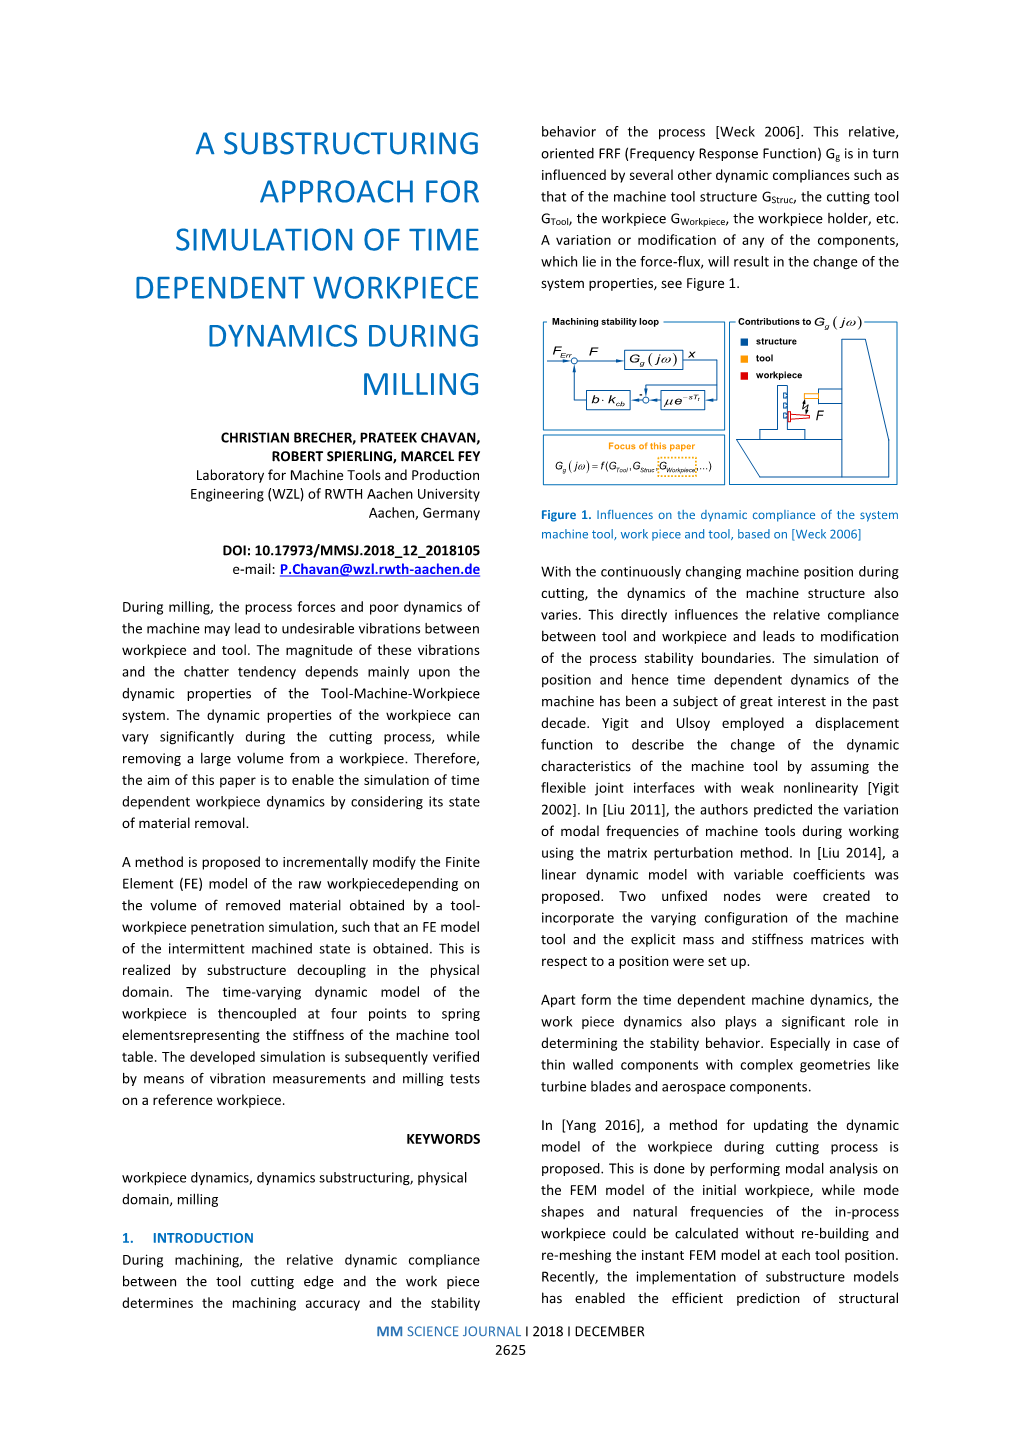 A Substructuring Approach for Simulation of Time Dependent Workpiece Dynamics During Milling